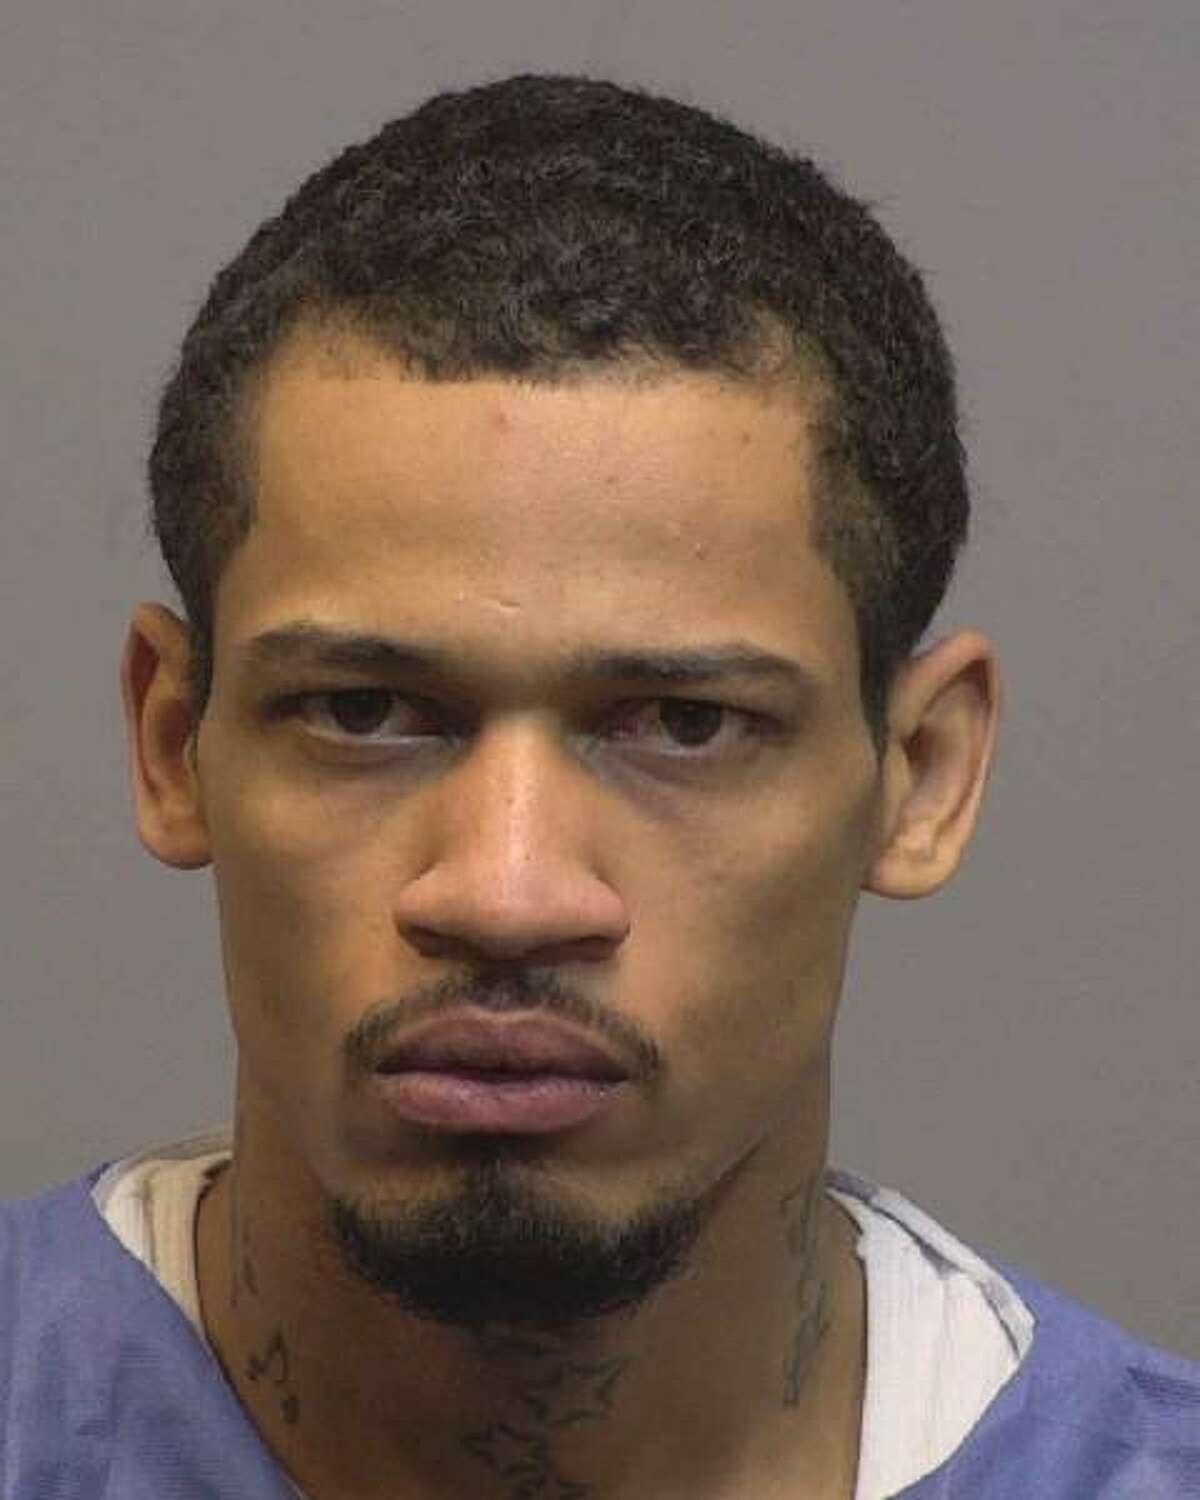 New Haven man Rashod Newton, who was convicted of killing the mother of his child in a 2021 shooting, was sentenced to 35 years in prison Thursday, according to state officials.